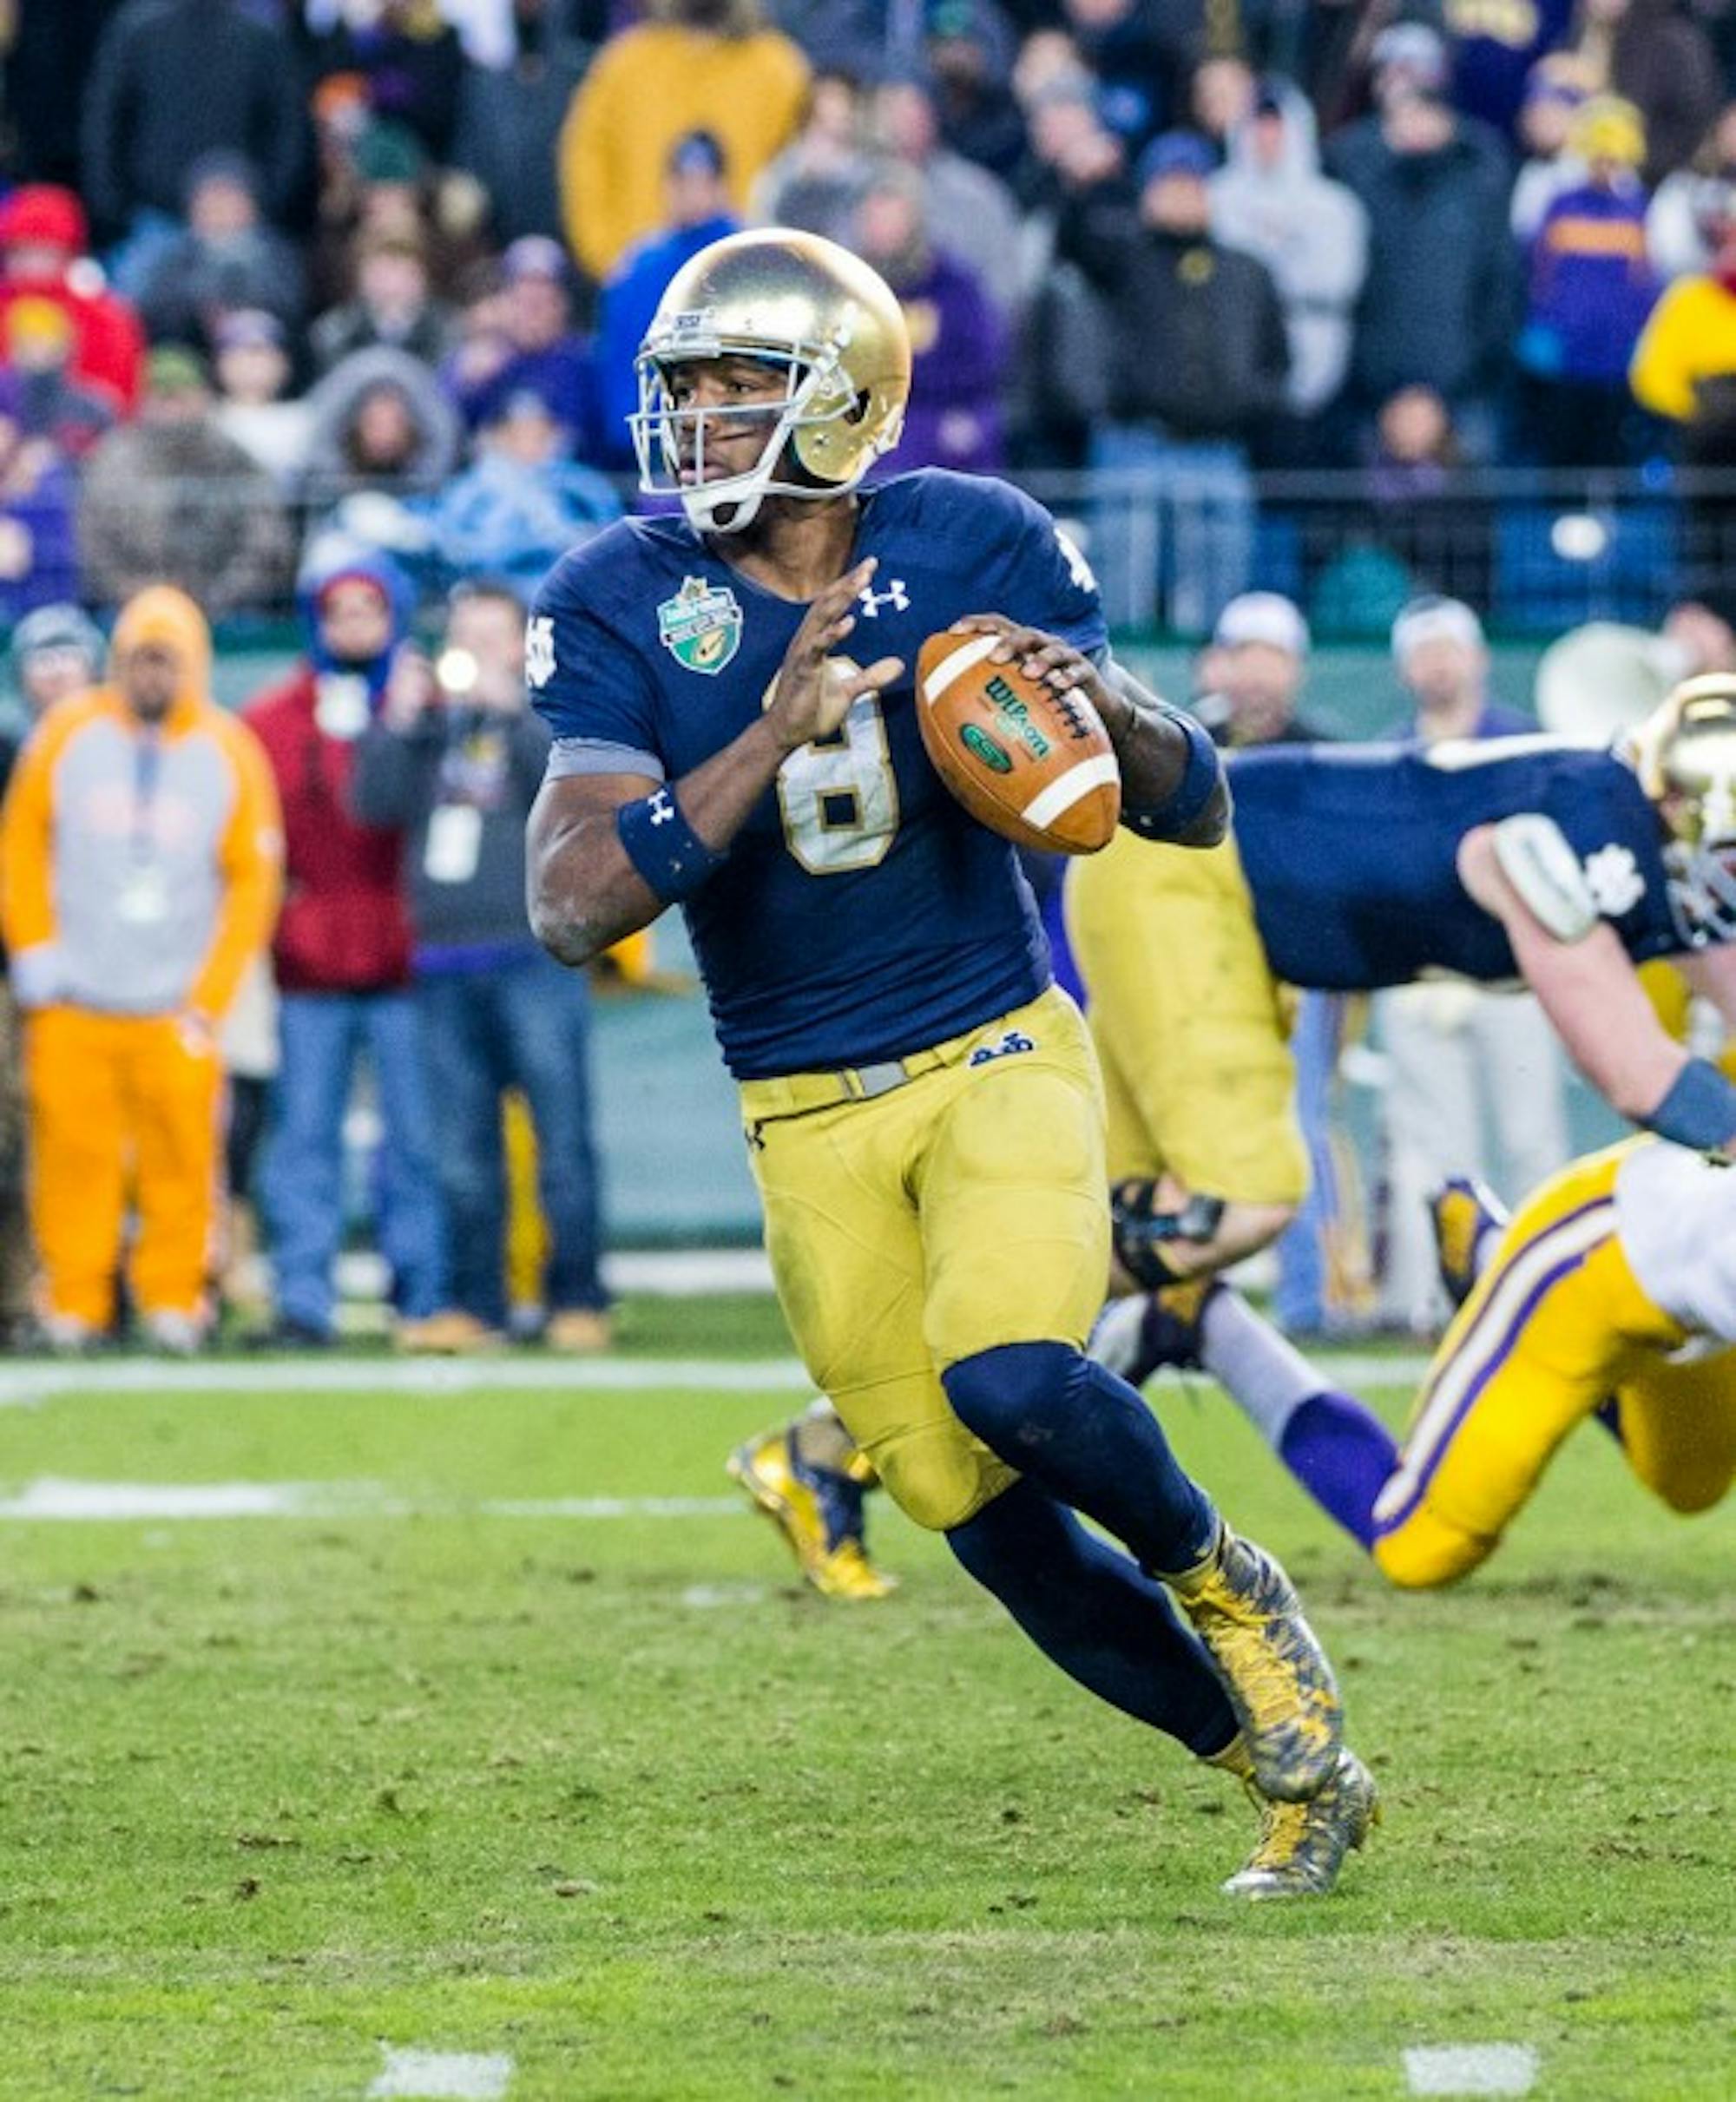 Irish junior quarterback Malik Zaire surveys the field during Notre Dame's 31-28 win over LSU in the Franklin American Mortgage Music City Bowl at LP Field in Nashville, Tennessee.